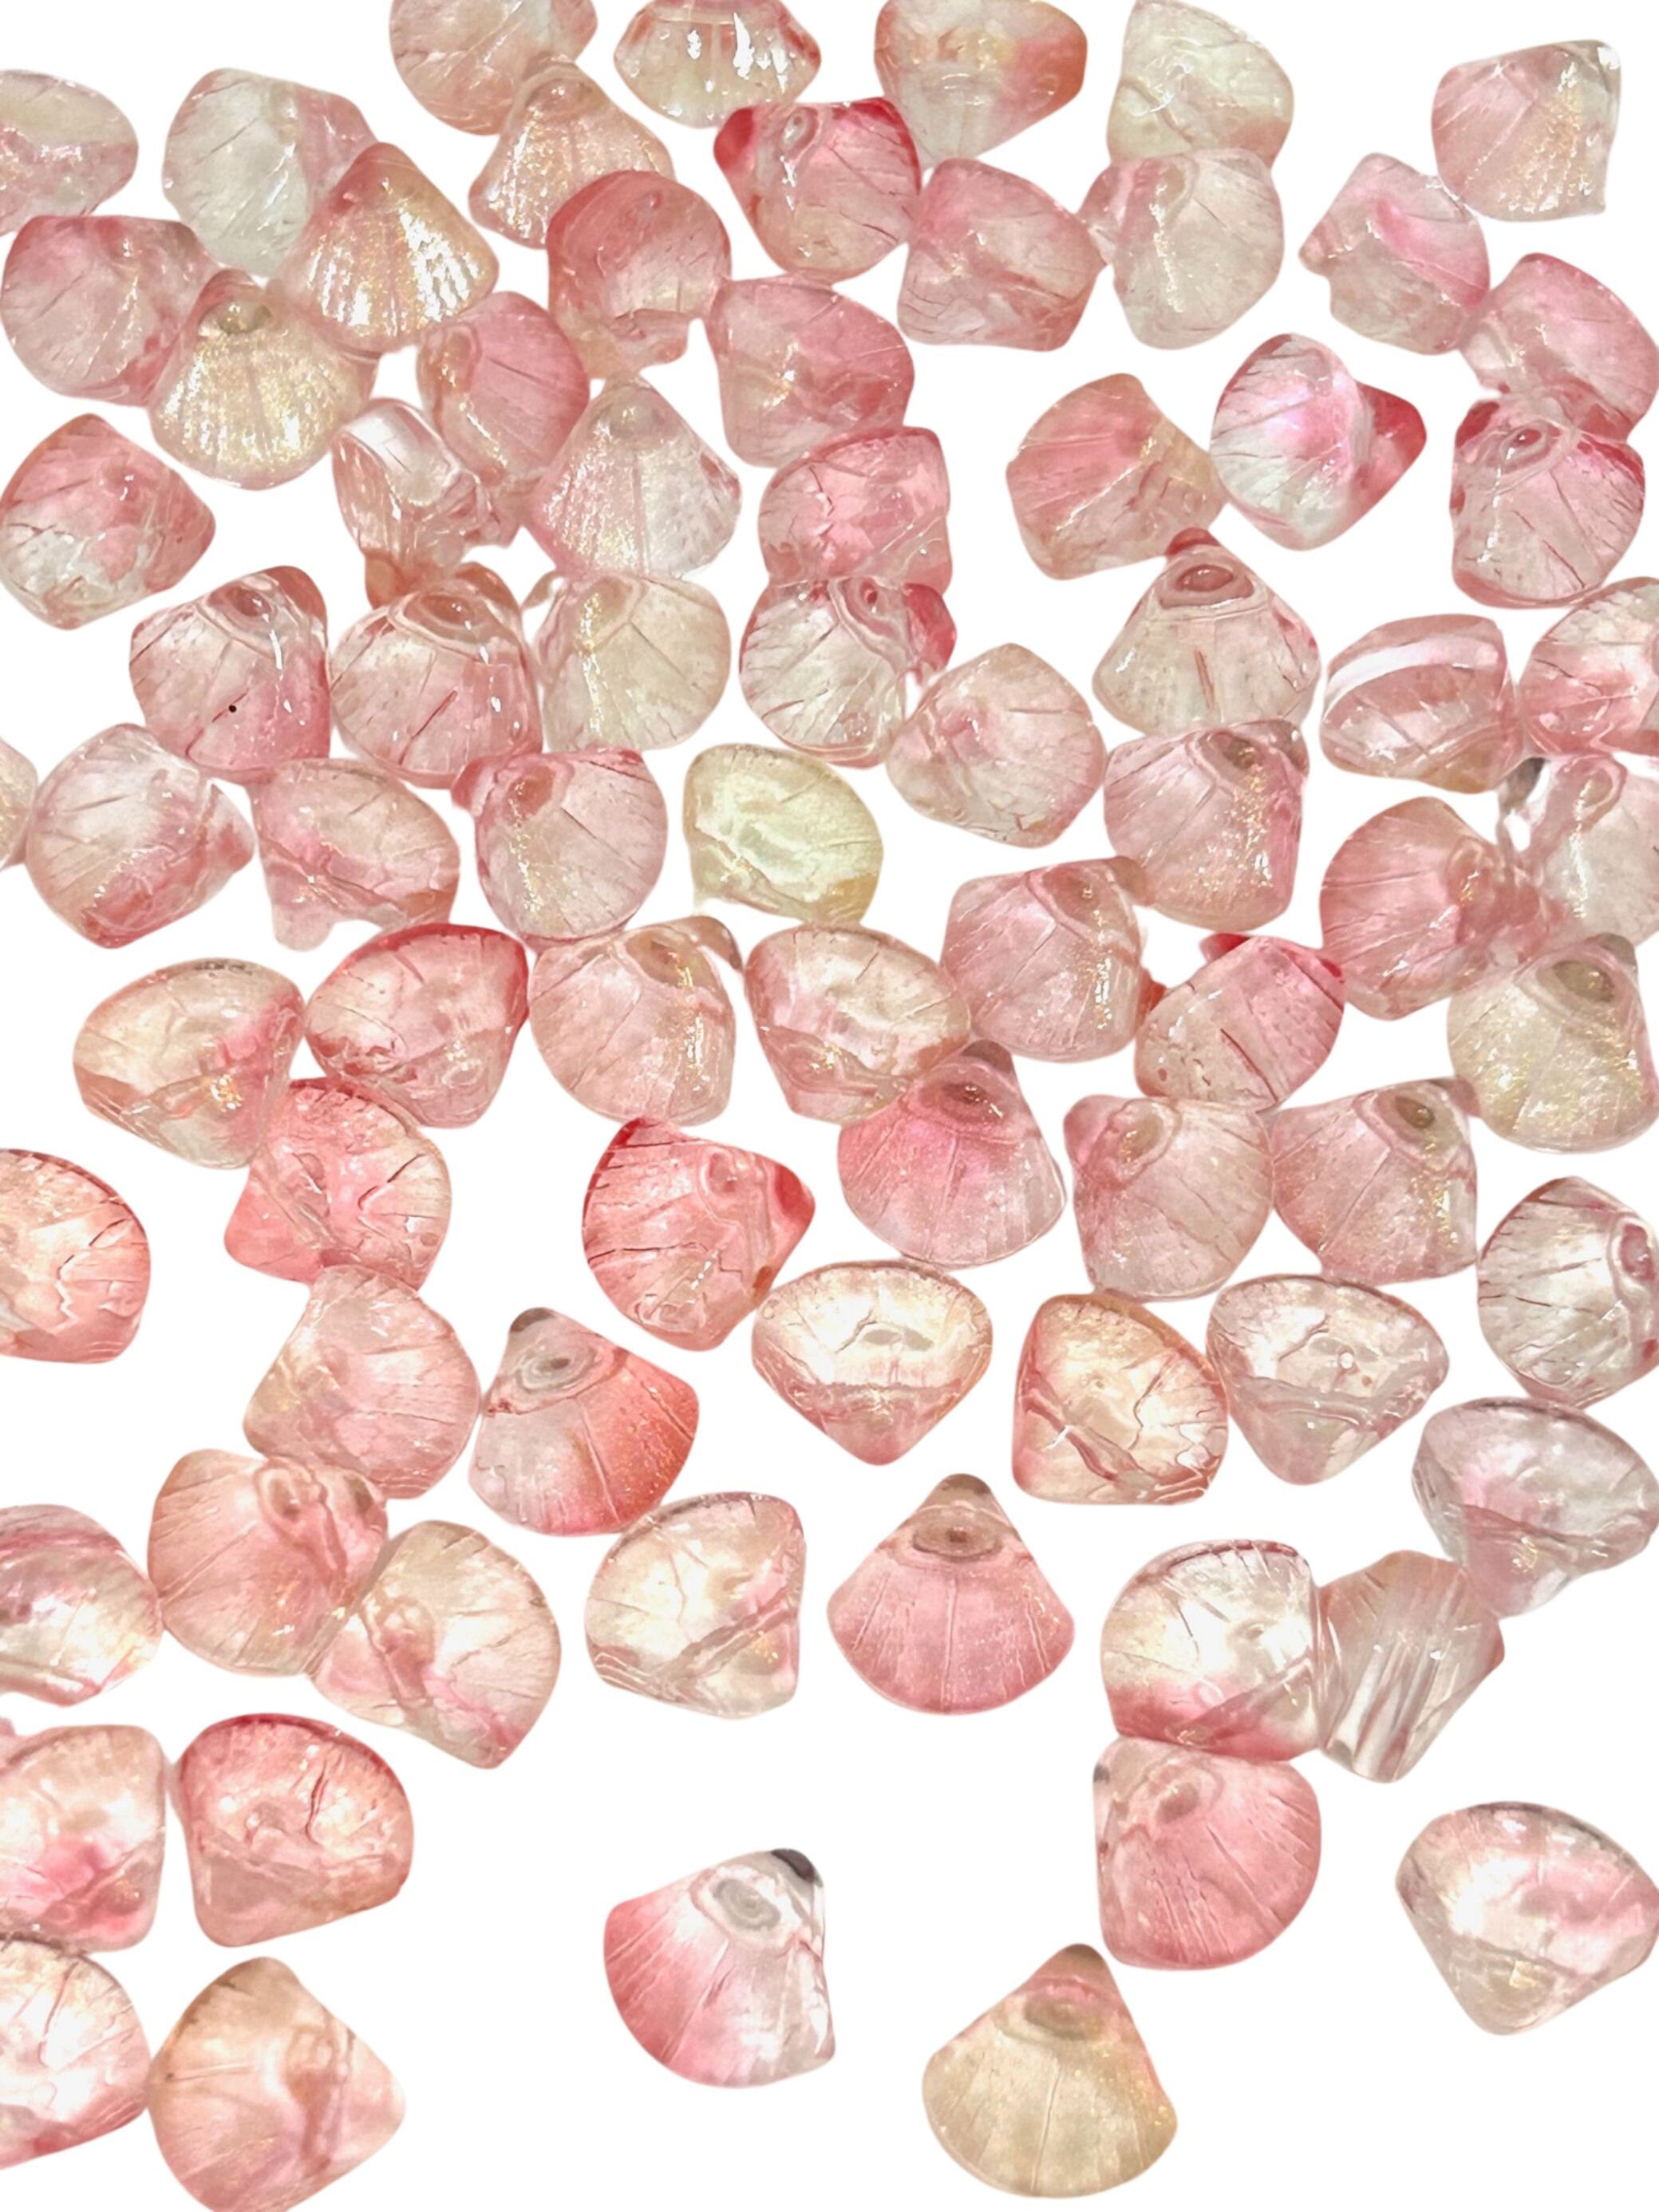 Glass Mermaid Seashell Beads with a Hint of Pink - Perfect for Ocean-Themed Jewelry Designs